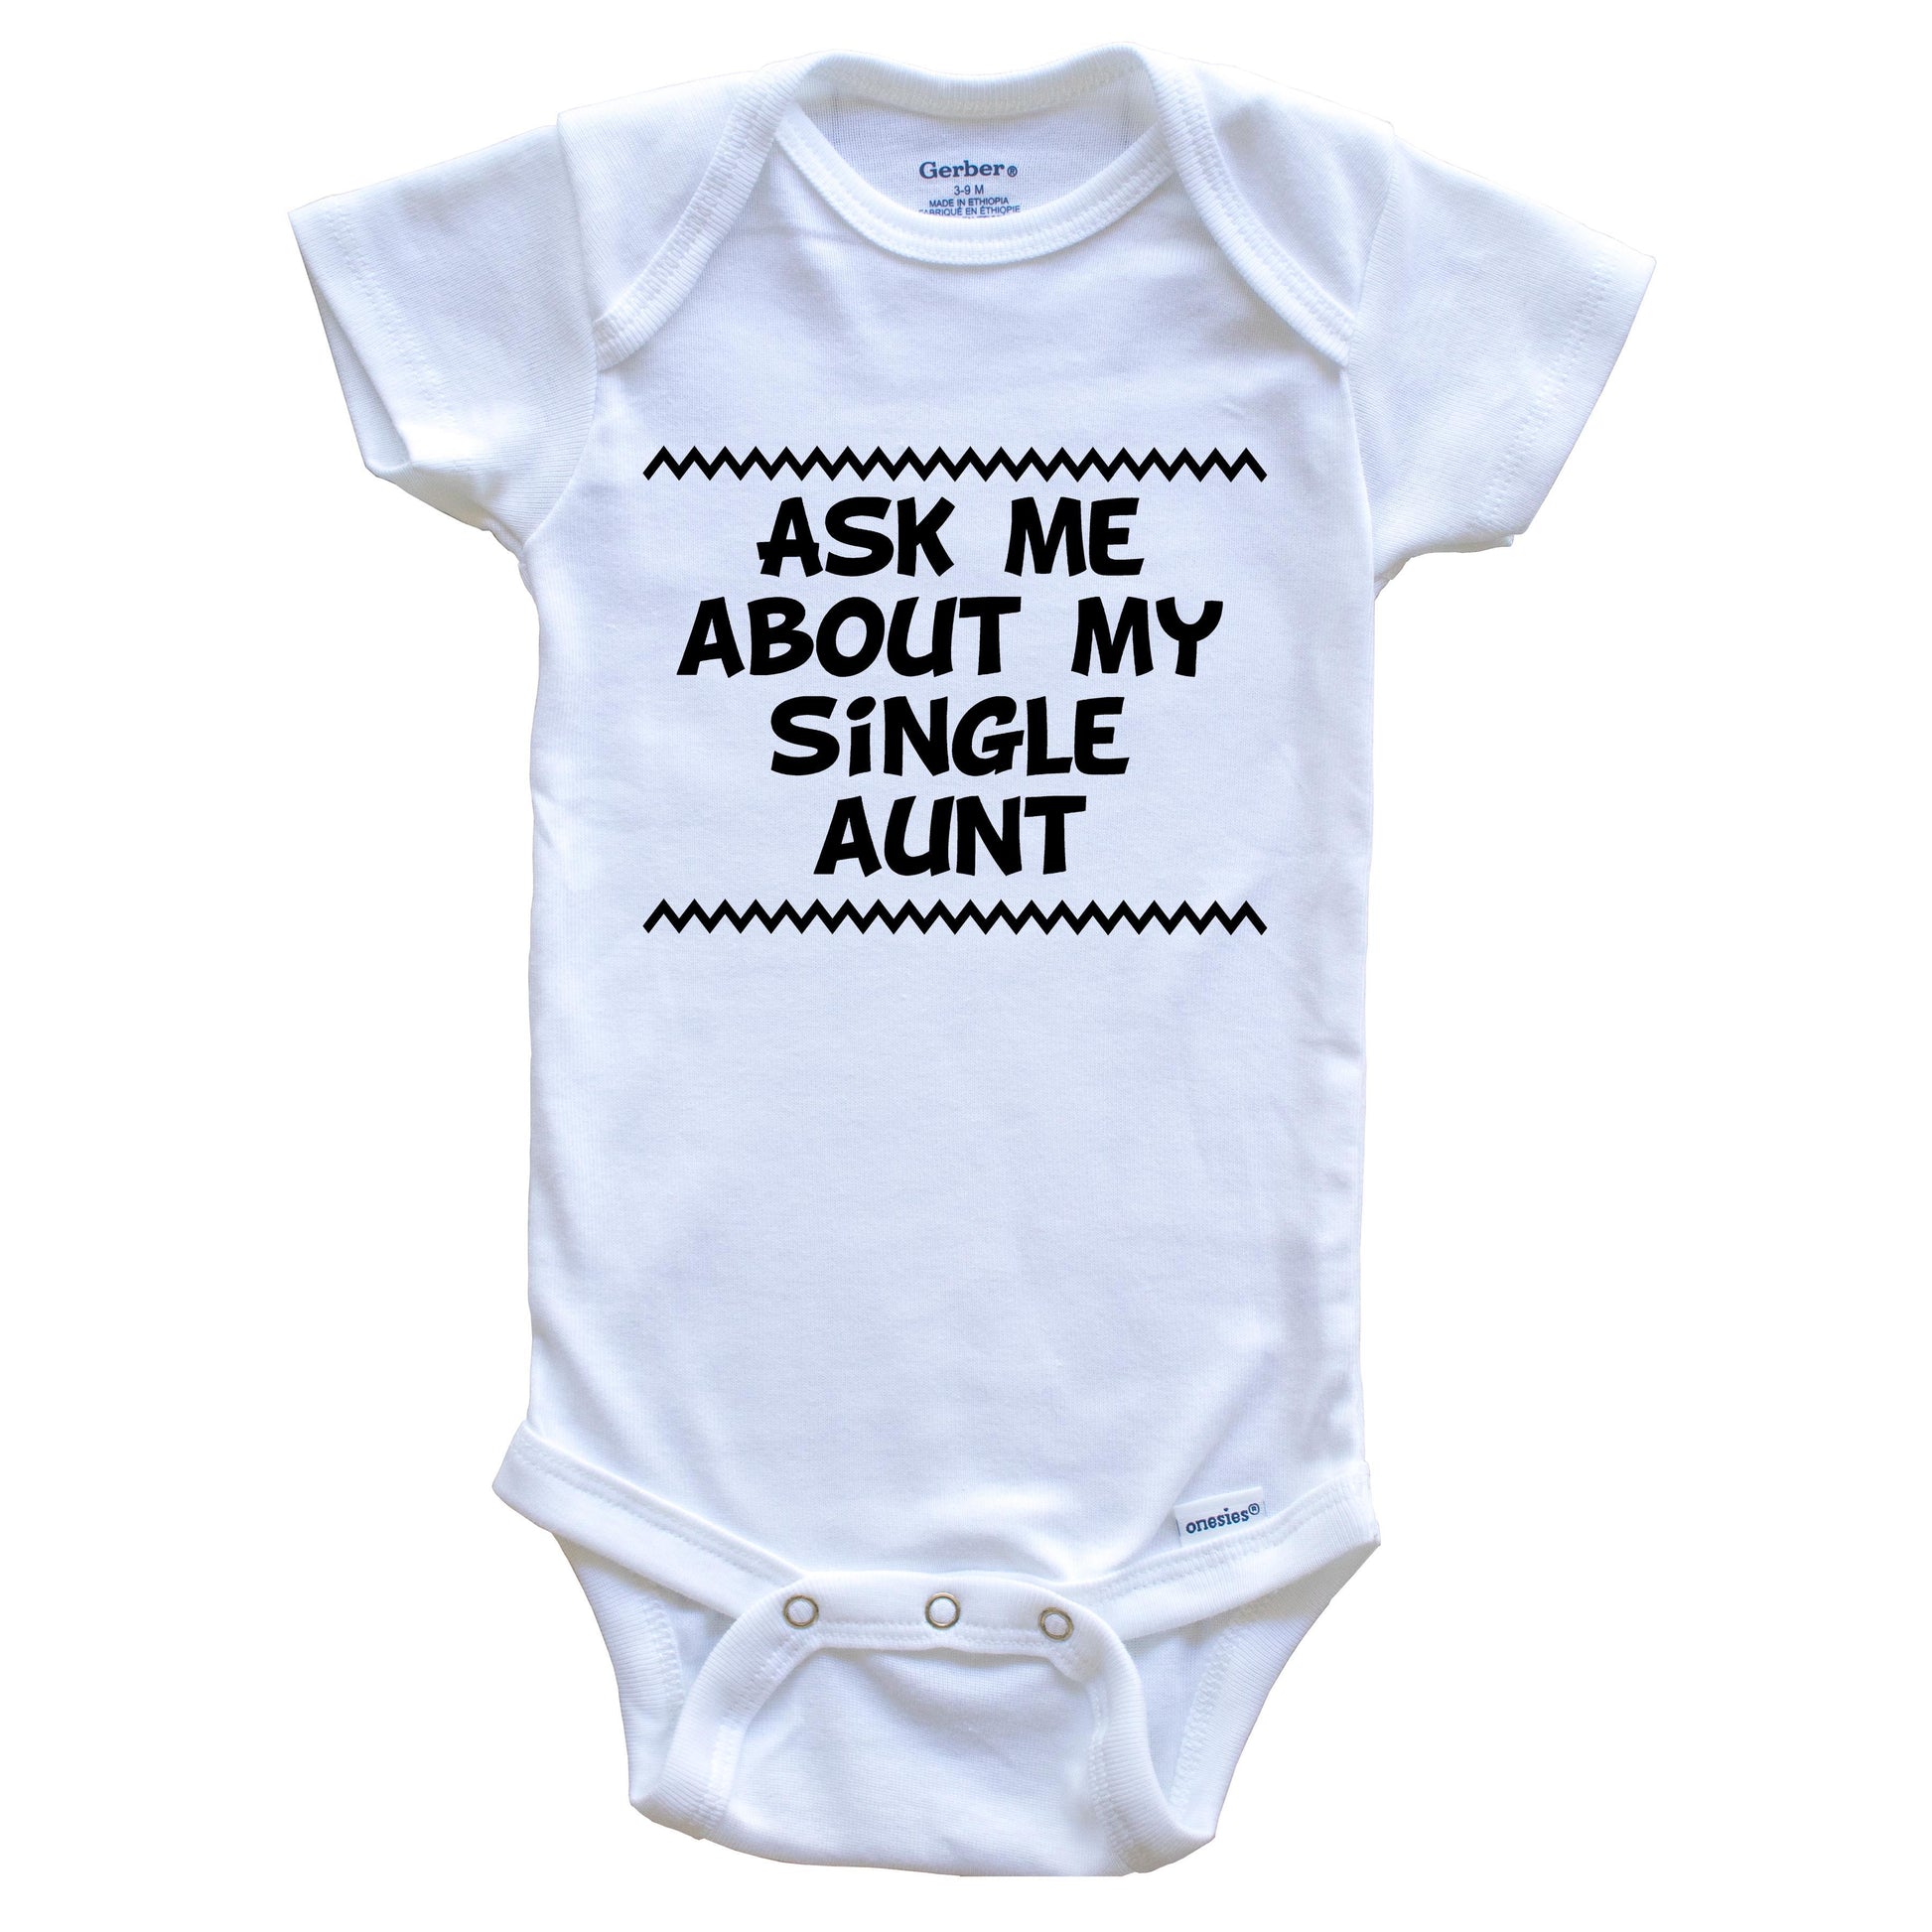 Ask Me About My Single Aunt Funny Baby Onesie - One Piece Baby Bodysuit